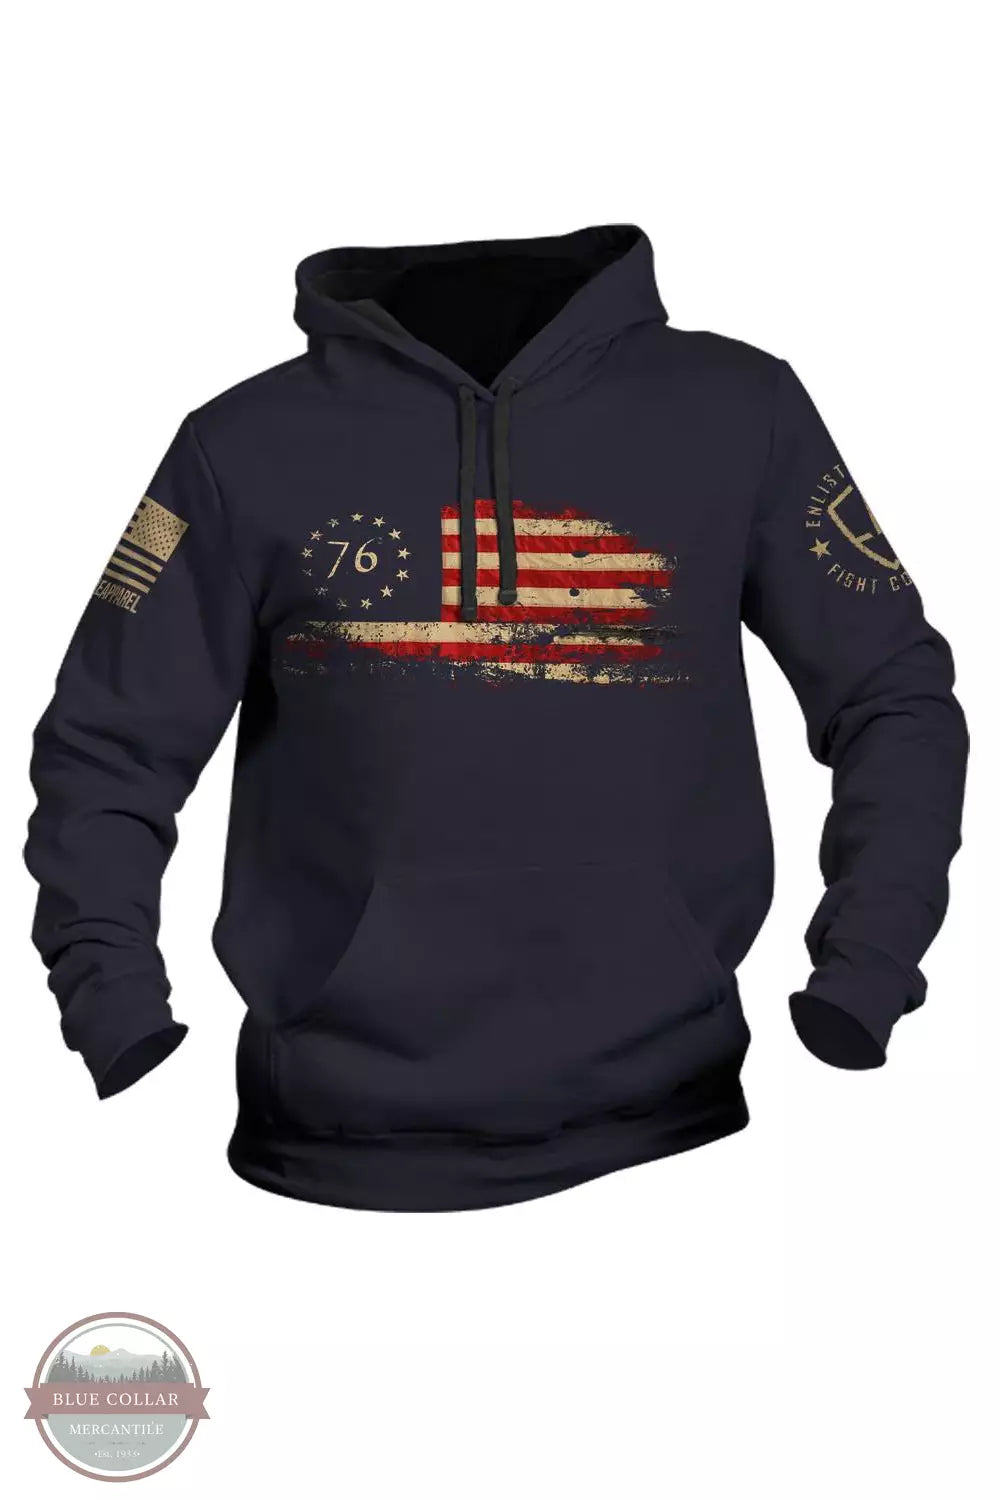 Nine Line E9-76-H-NAVY Enlisted 9 - 76 Flag Hoodie Front View